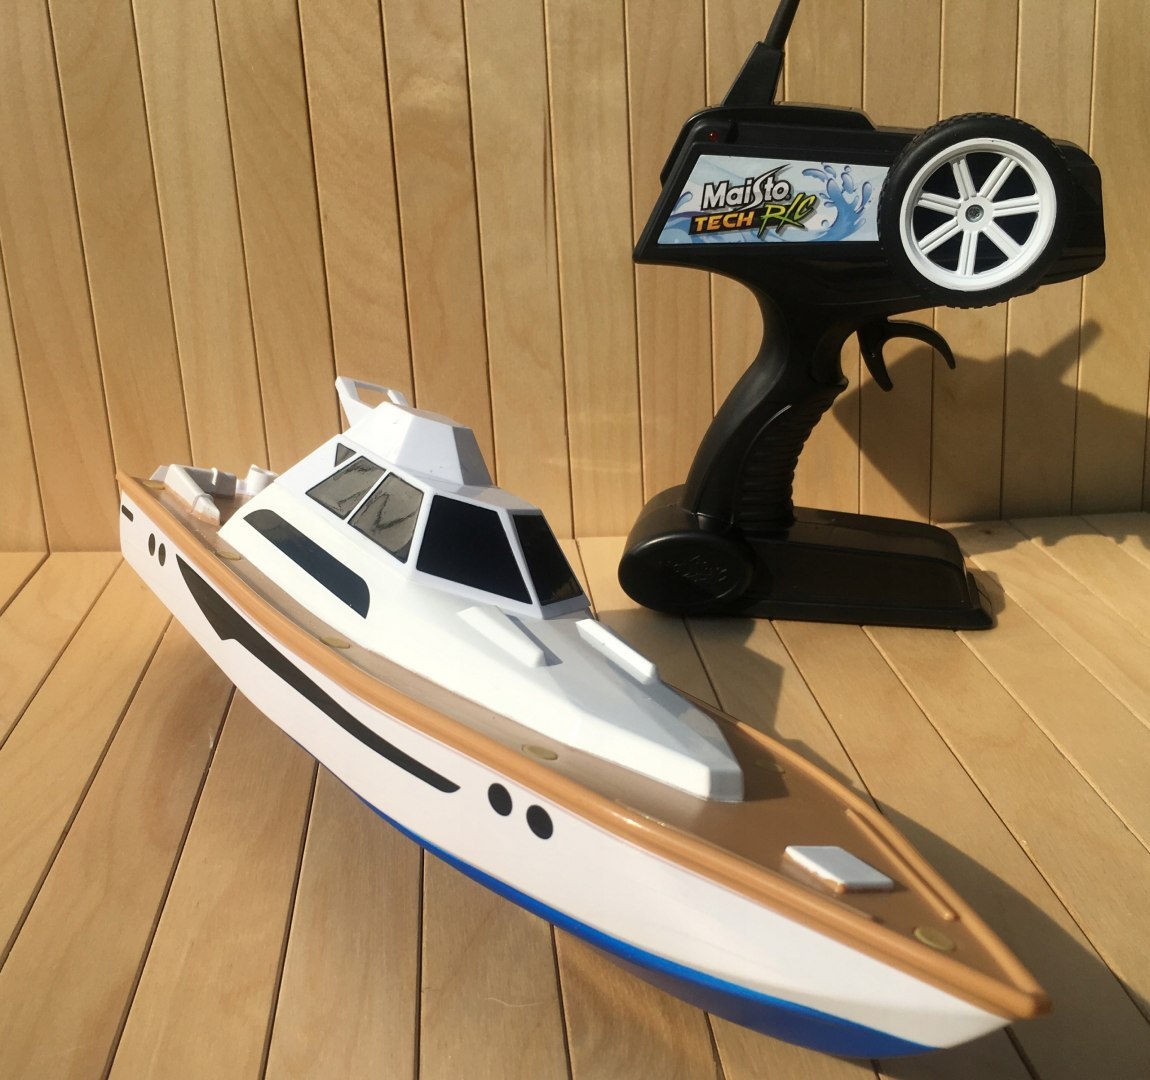 toy yacht images